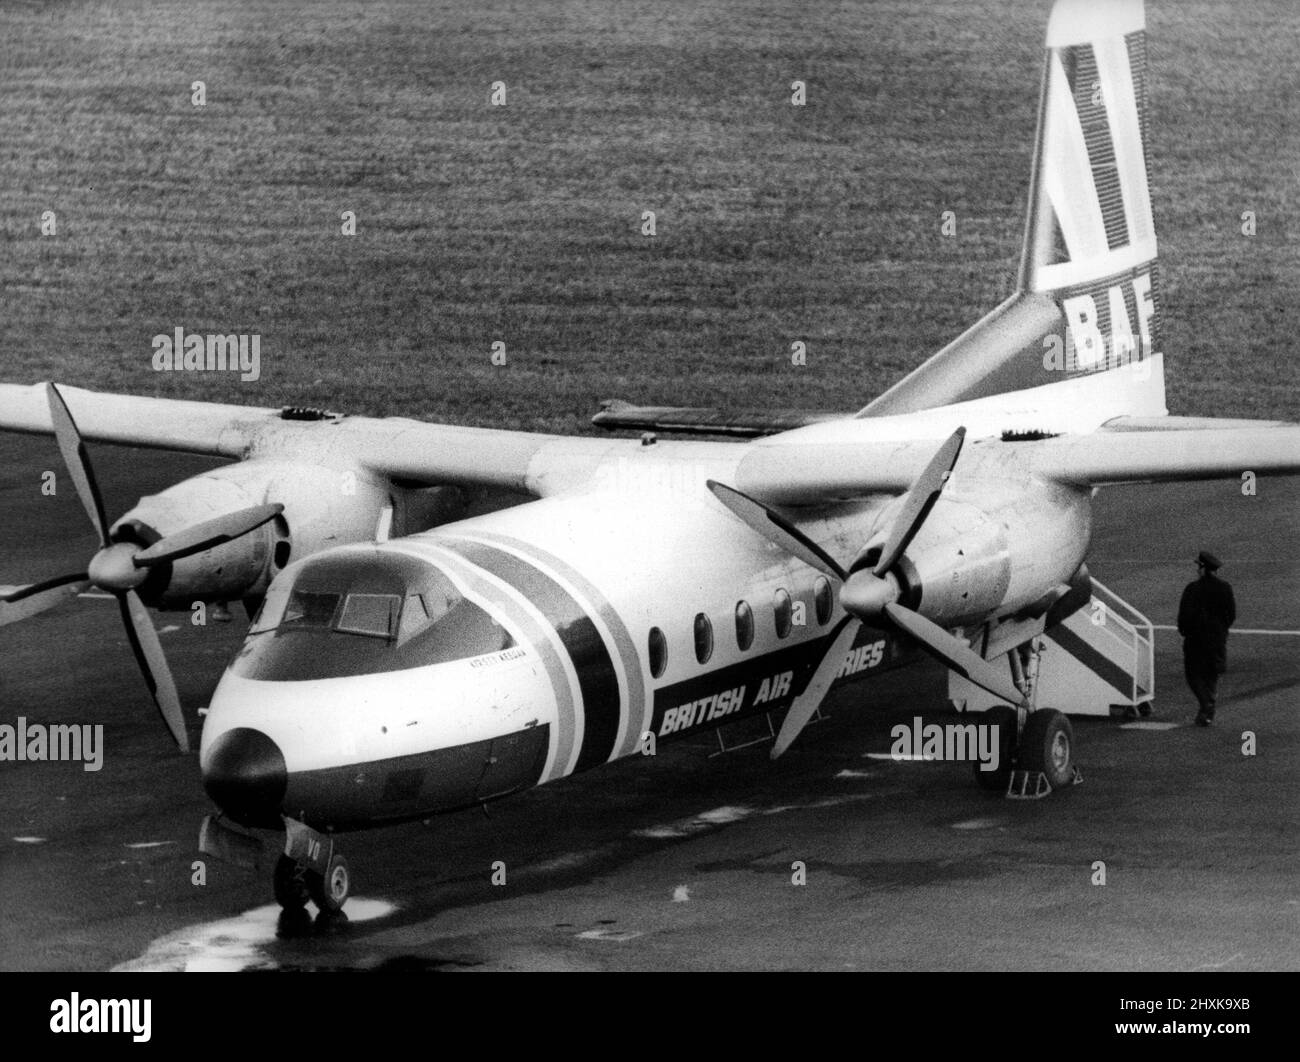 A Handley Page Dart Herald airliner of British Air Ferries on charter to Dan-Air on the apron at Newcastle Airport after it had been invovled in a full scale emergency alert after a wheel brake failsafe light had lit up, on its outward flight to Stavanger.    27th March, 1977. Stock Photo